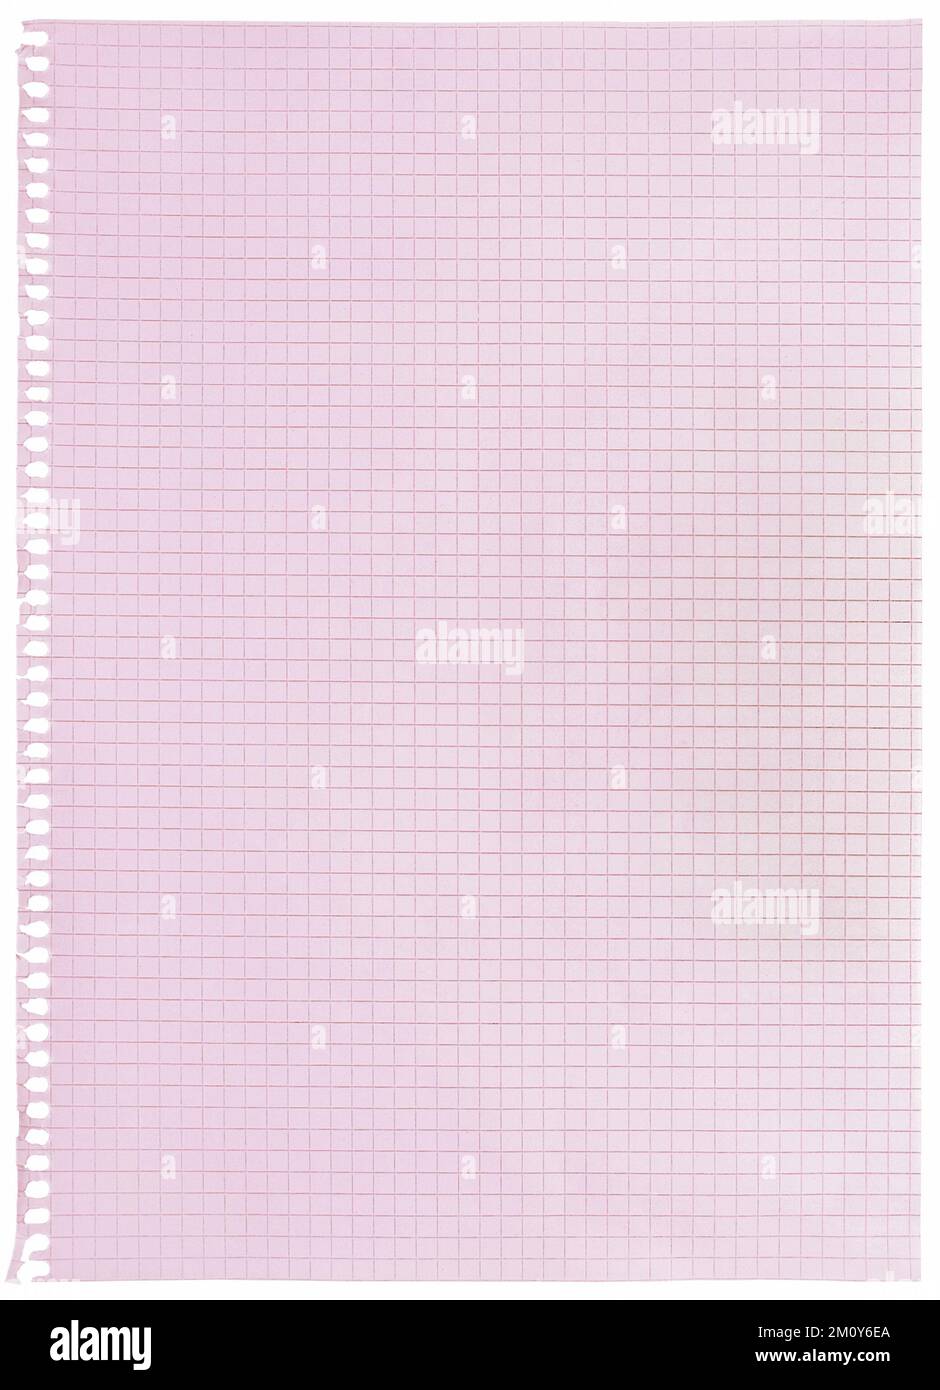 Checked spiral notebook page paper background, old aged isolated pink chequered ring binder sheet flat lay A4 copy space, vertical squared pattern Stock Photo